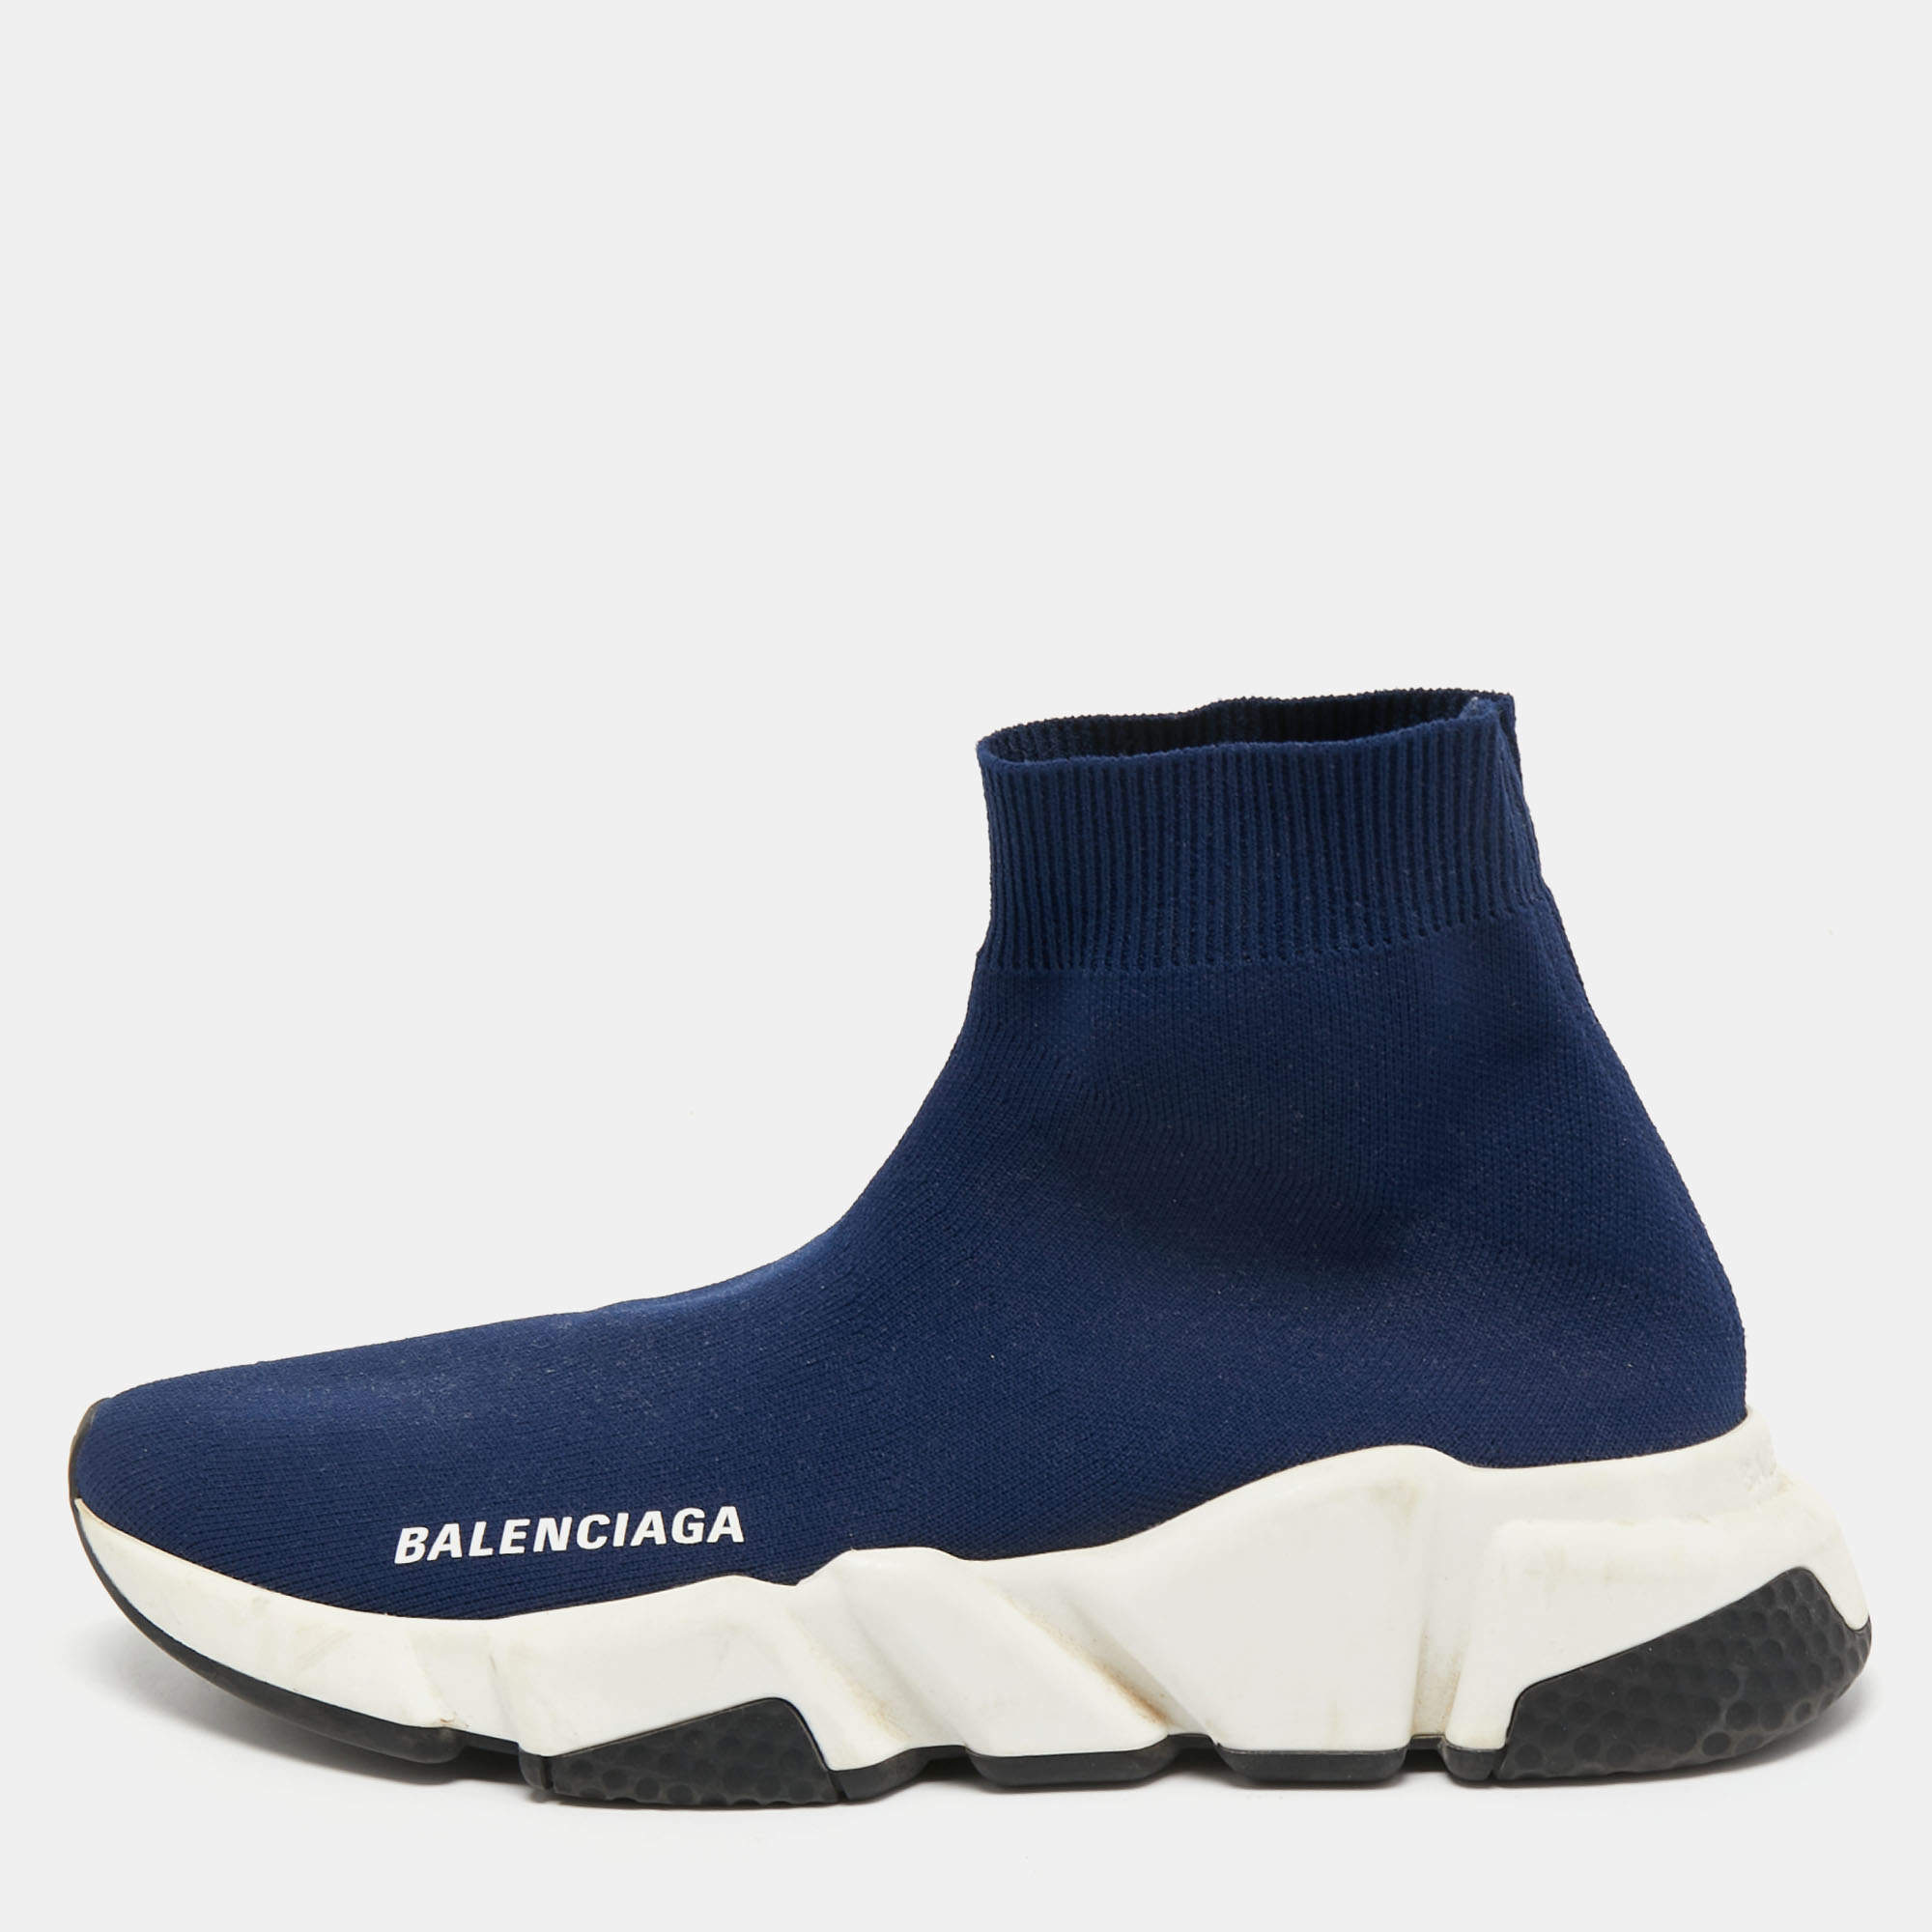 Balenciaga Navy Speed Runners HighTop Sneakers 595  liked on Polyvore  featuring mens fashi  Mens high top shoes Navy blue sneakers Mens  high top sneakers